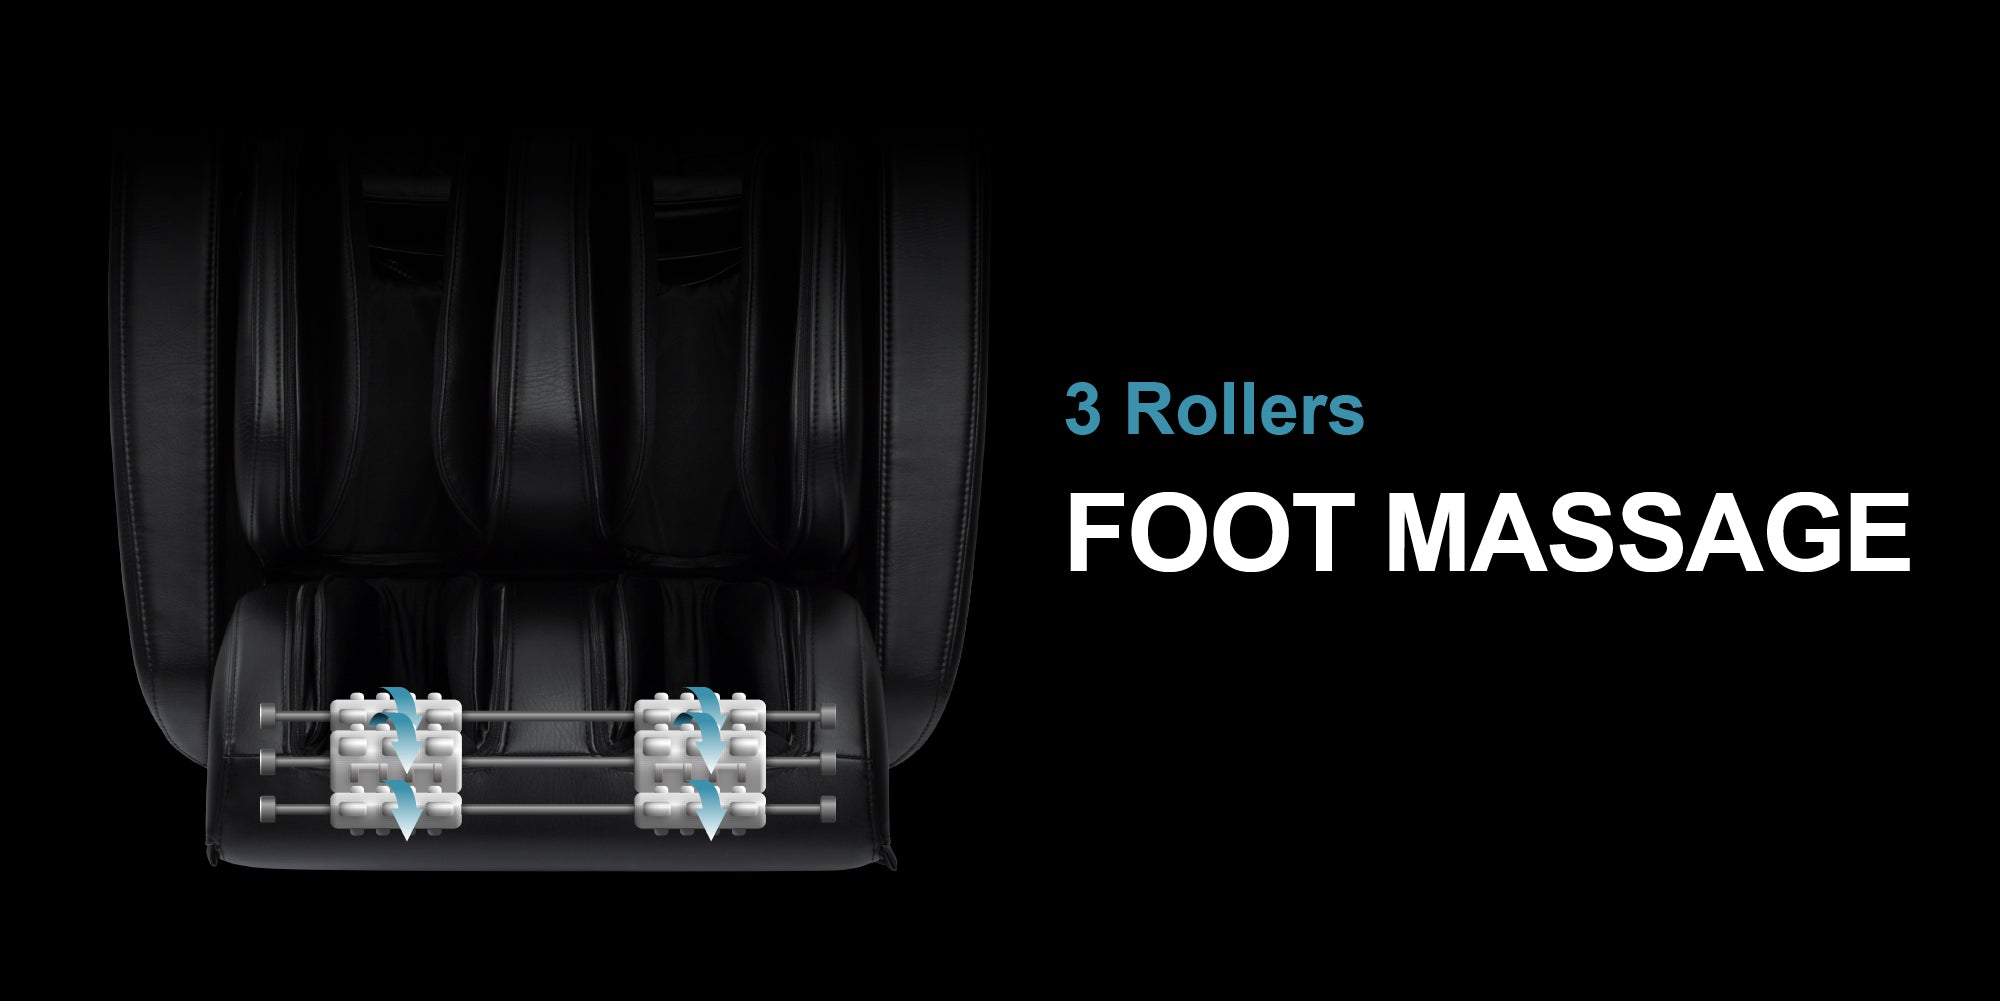 3 Rollers Foot Massage